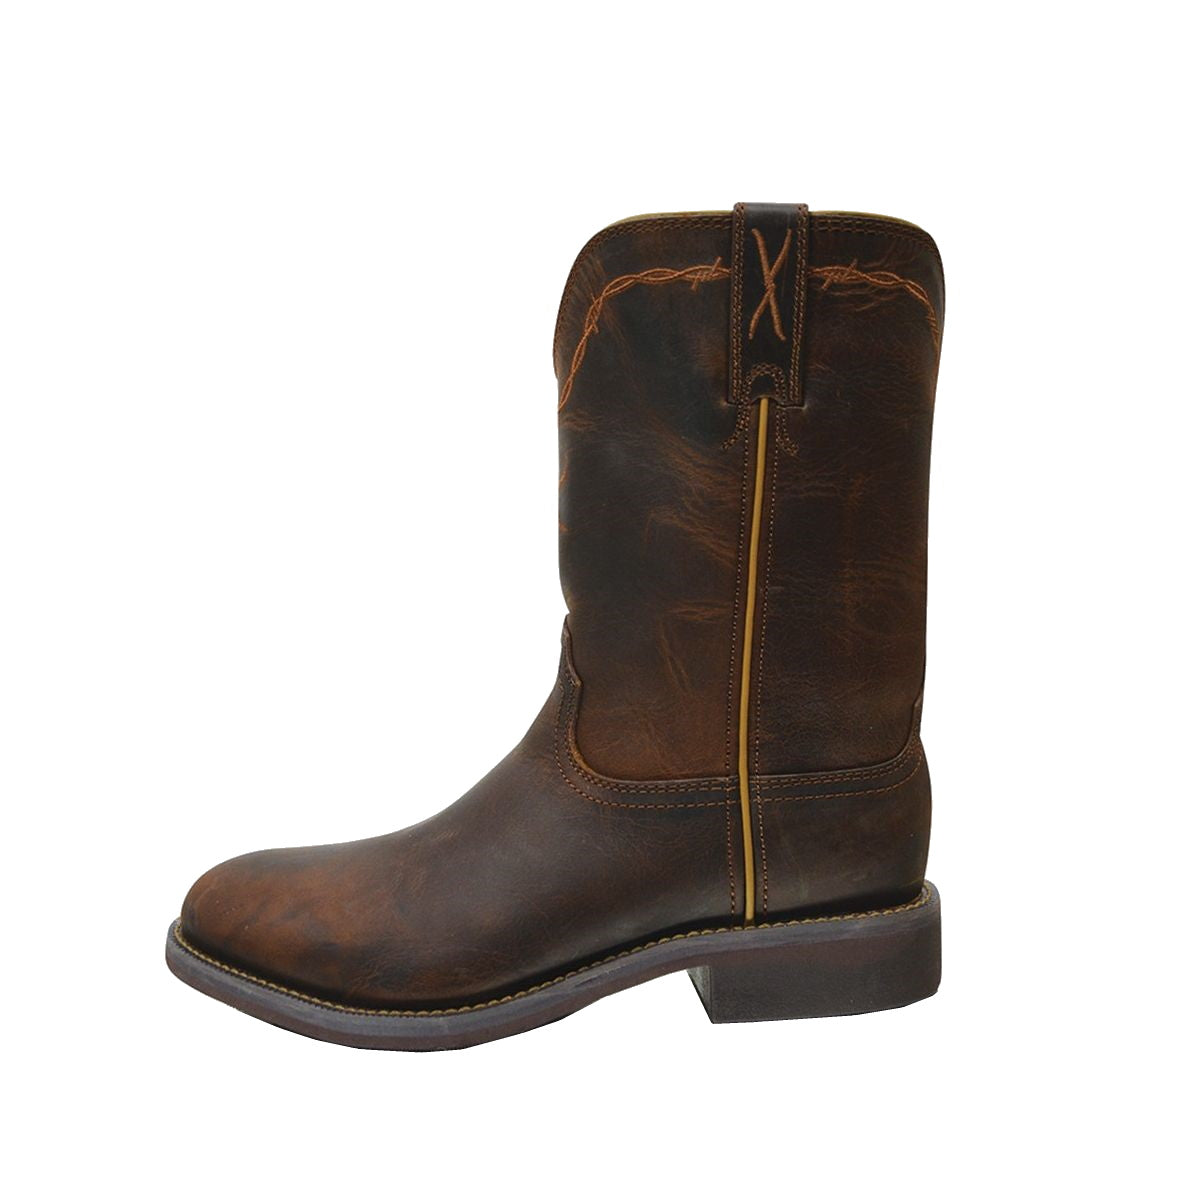 Side view of Twisted X Women's Roper Leather Cowboy Boots in Dark Brown